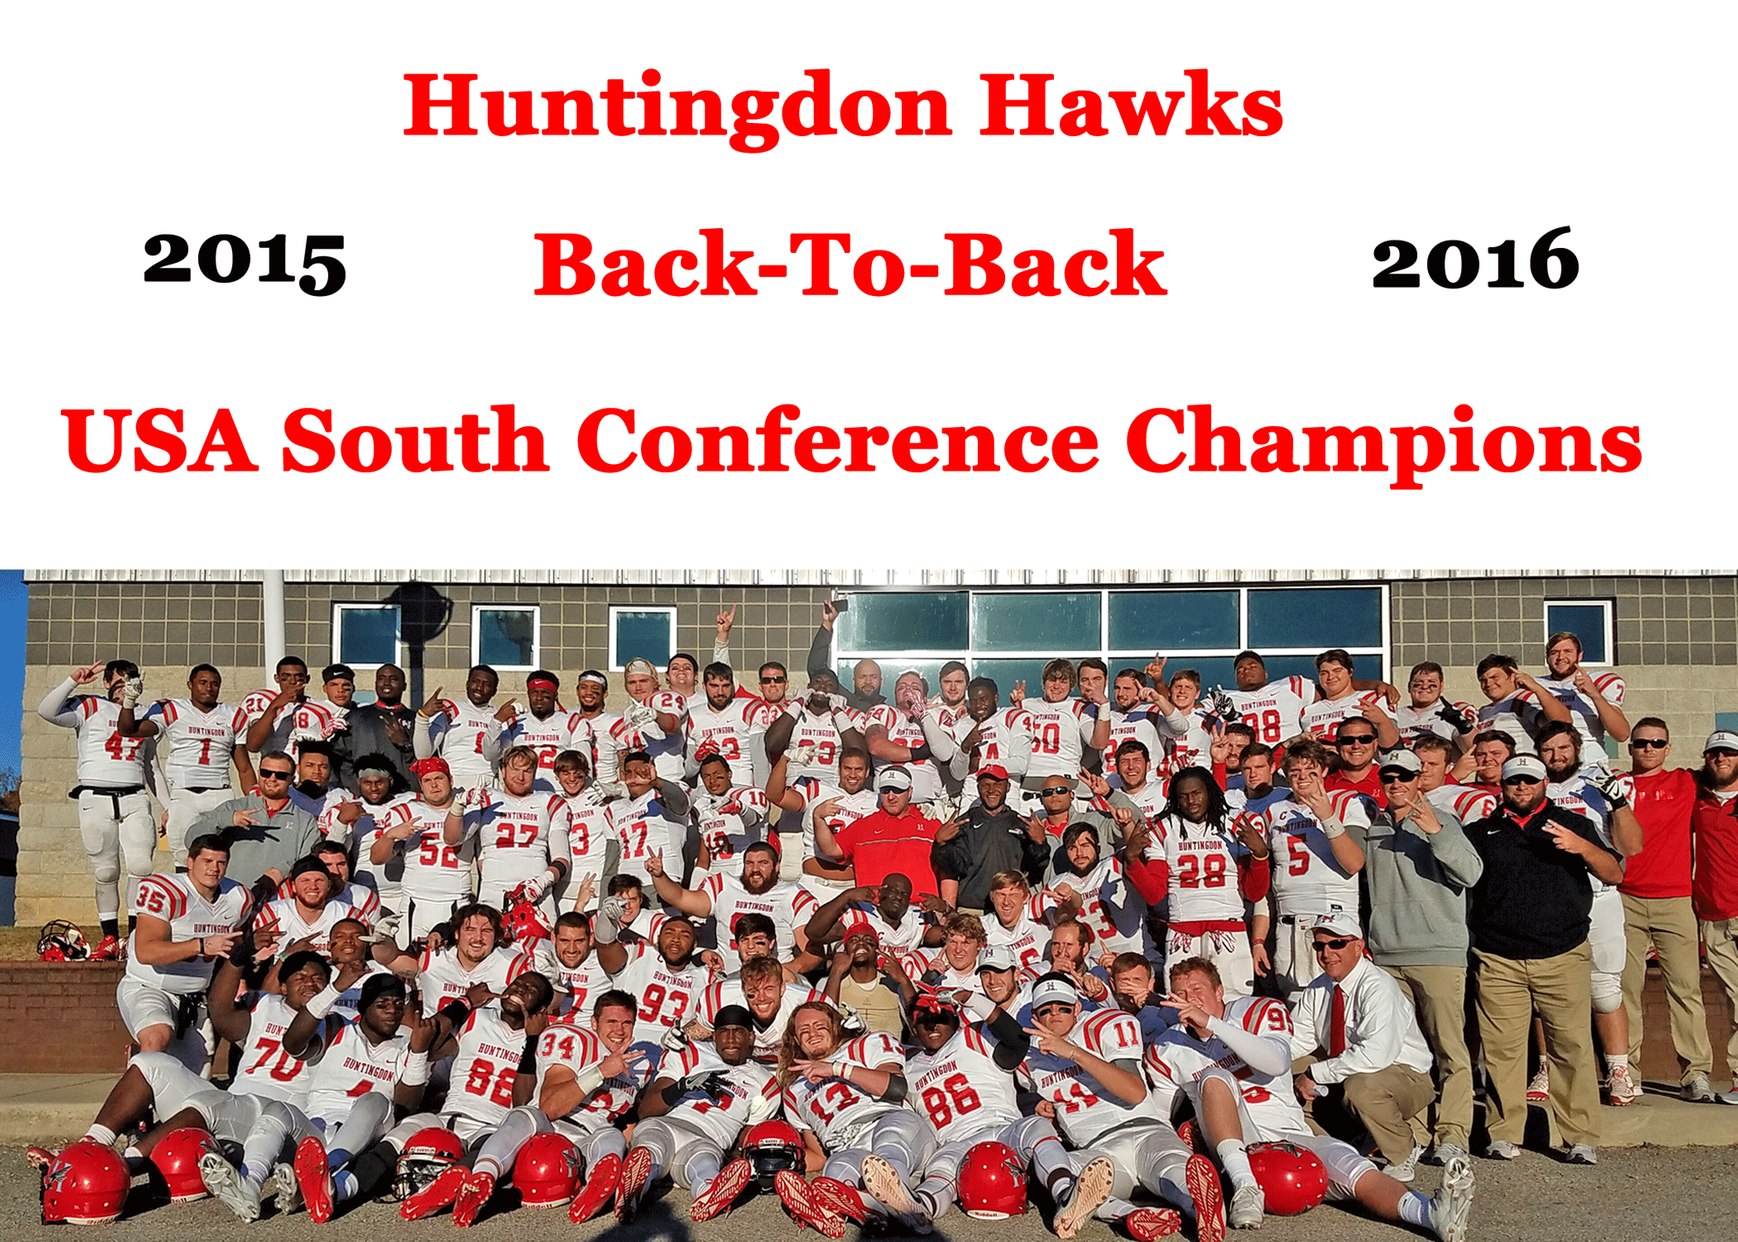 Back-to-Back: Hawks claim second straight USA South championship